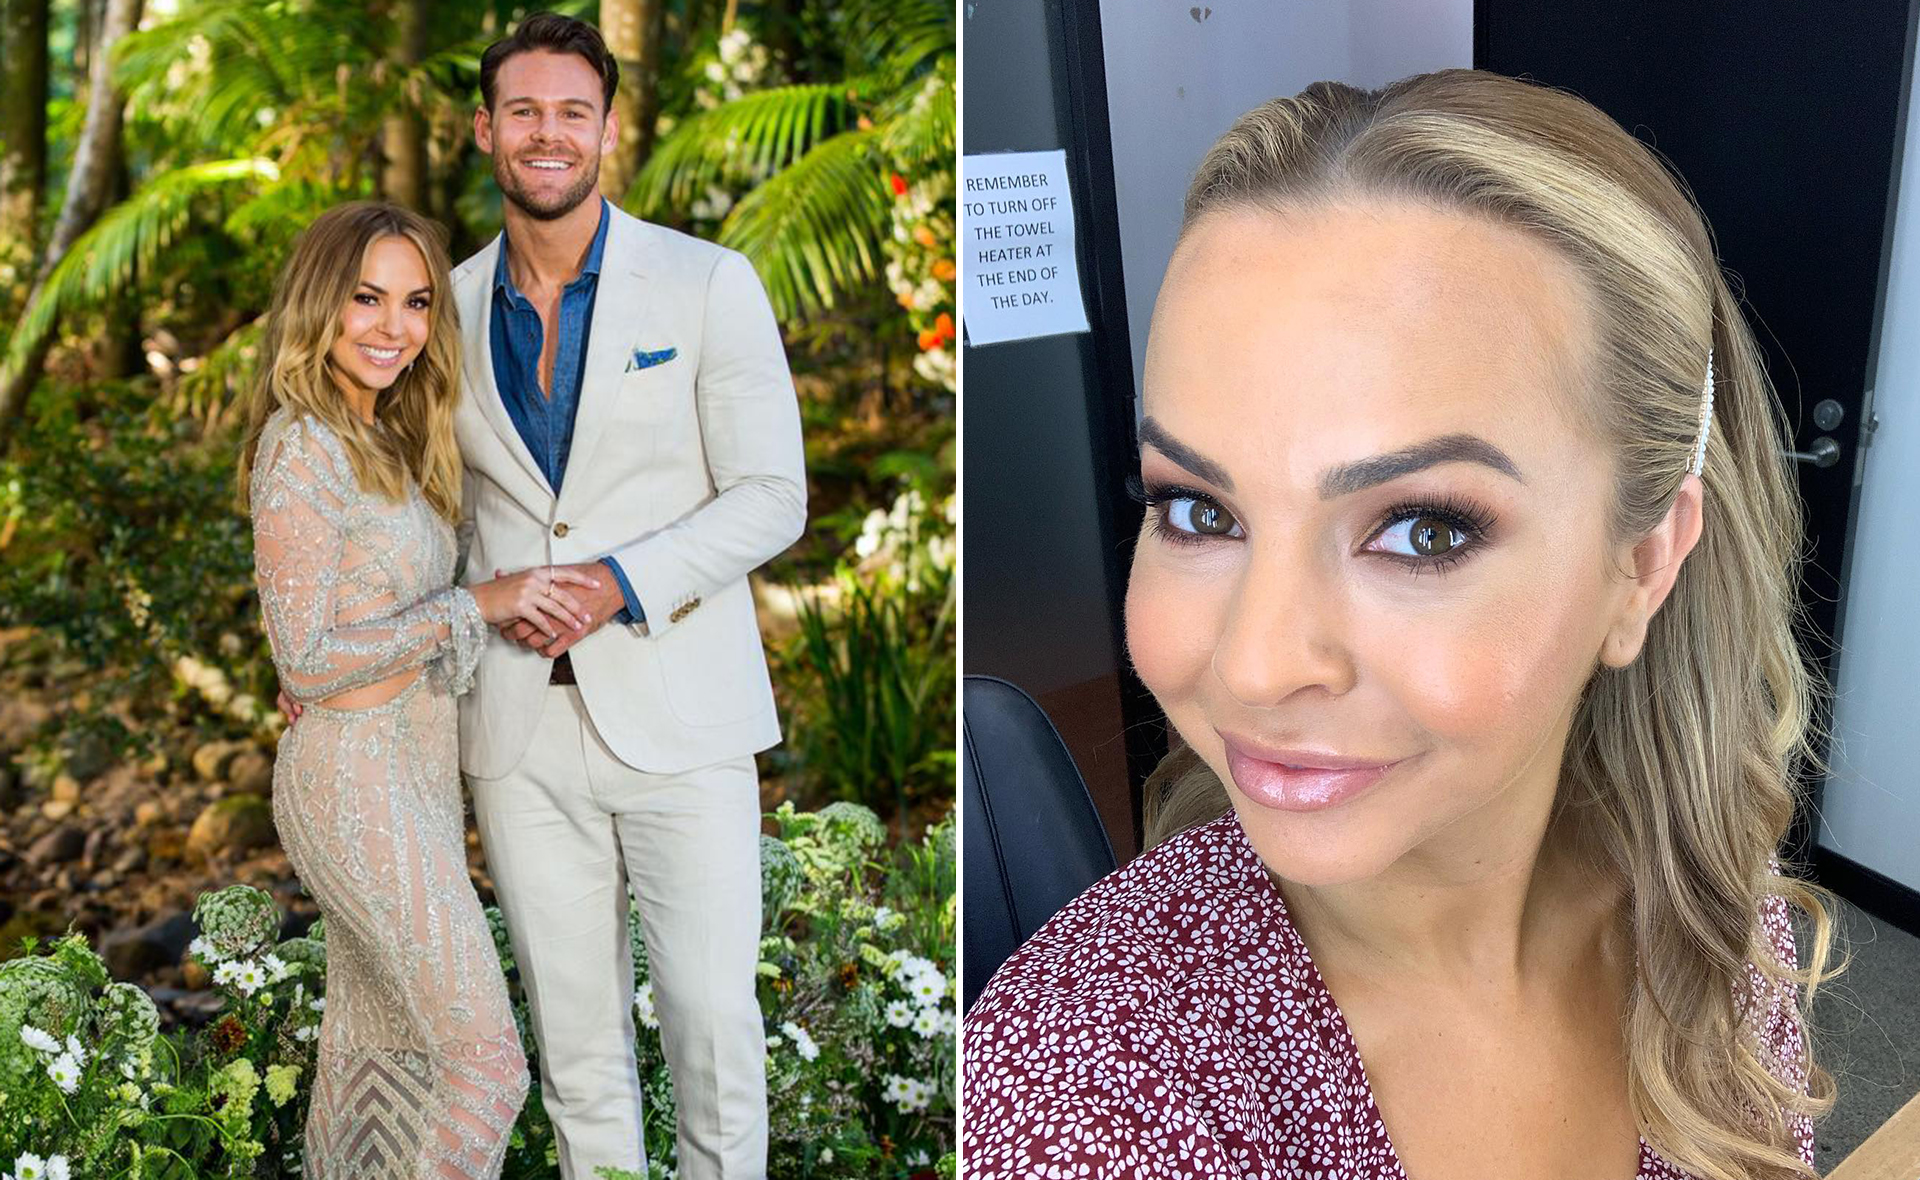 Angie Kent reveals why so many Bachelorette couples don’t last in the real world